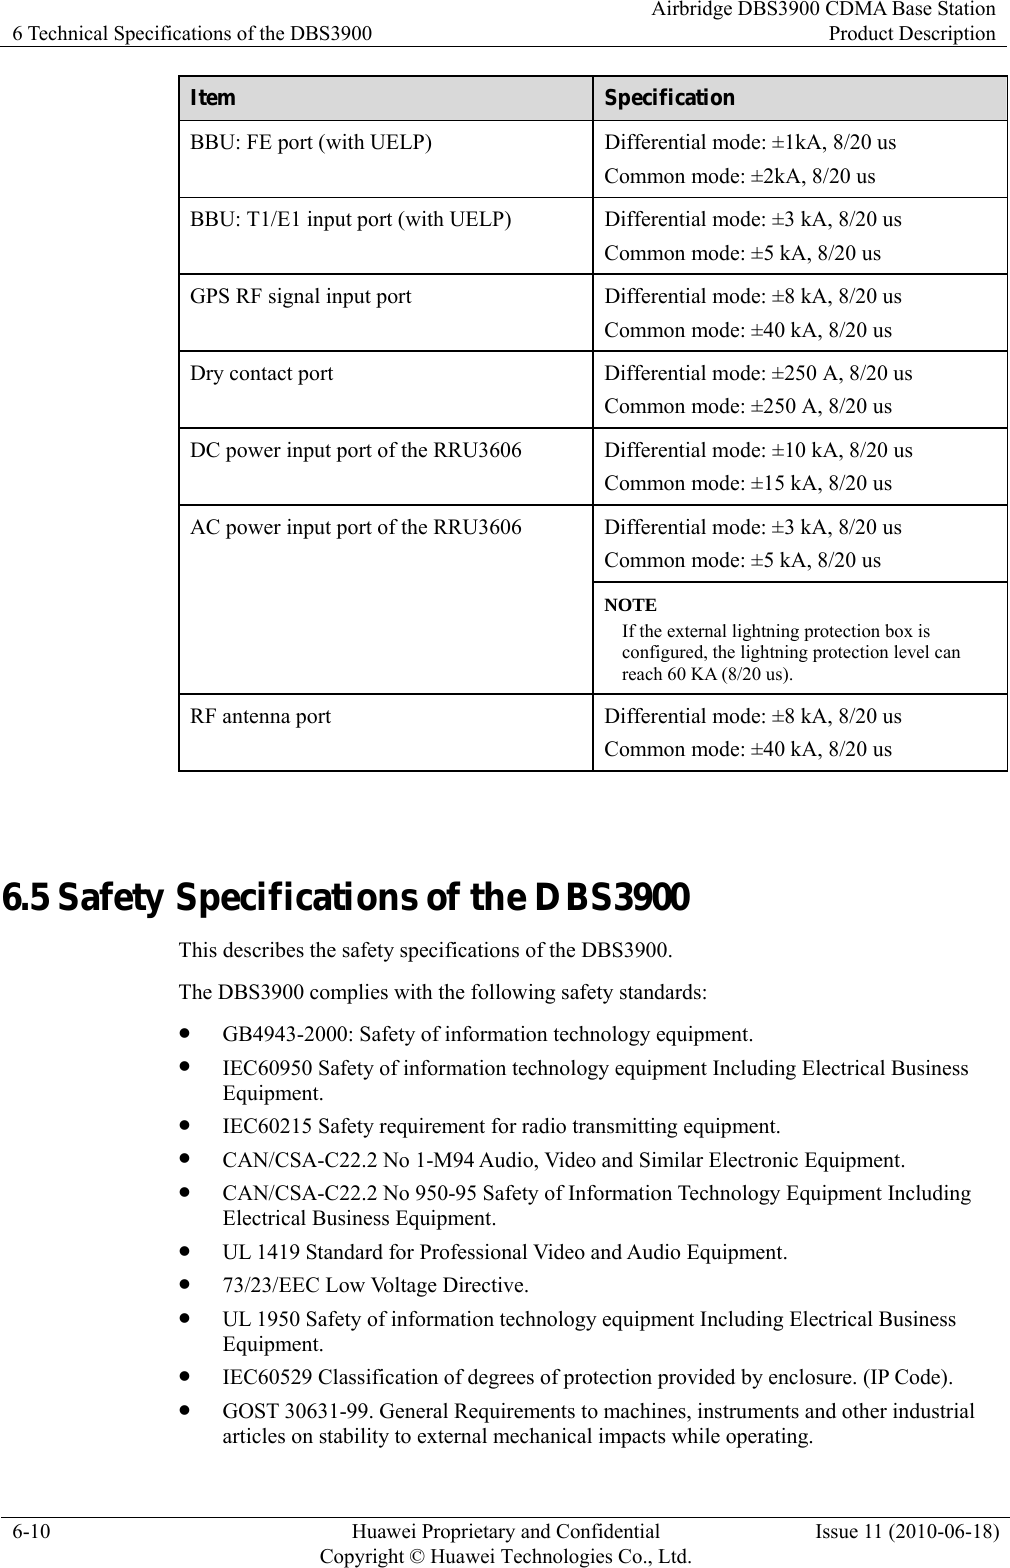 6 Technical Specifications of the DBS3900 Airbridge DBS3900 CDMA Base StationProduct Description 6-10  Huawei Proprietary and Confidential     Copyright © Huawei Technologies Co., Ltd.Issue 11 (2010-06-18) Item  Specification BBU: FE port (with UELP)  Differential mode: ±1kA, 8/20 us Common mode: ±2kA, 8/20 us BBU: T1/E1 input port (with UELP)  Differential mode: ±3 kA, 8/20 us Common mode: ±5 kA, 8/20 us GPS RF signal input port  Differential mode: ±8 kA, 8/20 us Common mode: ±40 kA, 8/20 us Dry contact port  Differential mode: ±250 A, 8/20 us Common mode: ±250 A, 8/20 us DC power input port of the RRU3606  Differential mode: ±10 kA, 8/20 us Common mode: ±15 kA, 8/20 us Differential mode: ±3 kA, 8/20 us Common mode: ±5 kA, 8/20 us AC power input port of the RRU3606 NOTE If the external lightning protection box is configured, the lightning protection level can reach 60 KA (8/20 us). RF antenna port  Differential mode: ±8 kA, 8/20 us Common mode: ±40 kA, 8/20 us  6.5 Safety Specifications of the DBS3900 This describes the safety specifications of the DBS3900. The DBS3900 complies with the following safety standards: z GB4943-2000: Safety of information technology equipment. z IEC60950 Safety of information technology equipment Including Electrical Business Equipment. z IEC60215 Safety requirement for radio transmitting equipment. z CAN/CSA-C22.2 No 1-M94 Audio, Video and Similar Electronic Equipment. z CAN/CSA-C22.2 No 950-95 Safety of Information Technology Equipment Including Electrical Business Equipment. z UL 1419 Standard for Professional Video and Audio Equipment. z 73/23/EEC Low Voltage Directive. z UL 1950 Safety of information technology equipment Including Electrical Business Equipment. z IEC60529 Classification of degrees of protection provided by enclosure. (IP Code). z GOST 30631-99. General Requirements to machines, instruments and other industrial articles on stability to external mechanical impacts while operating. 